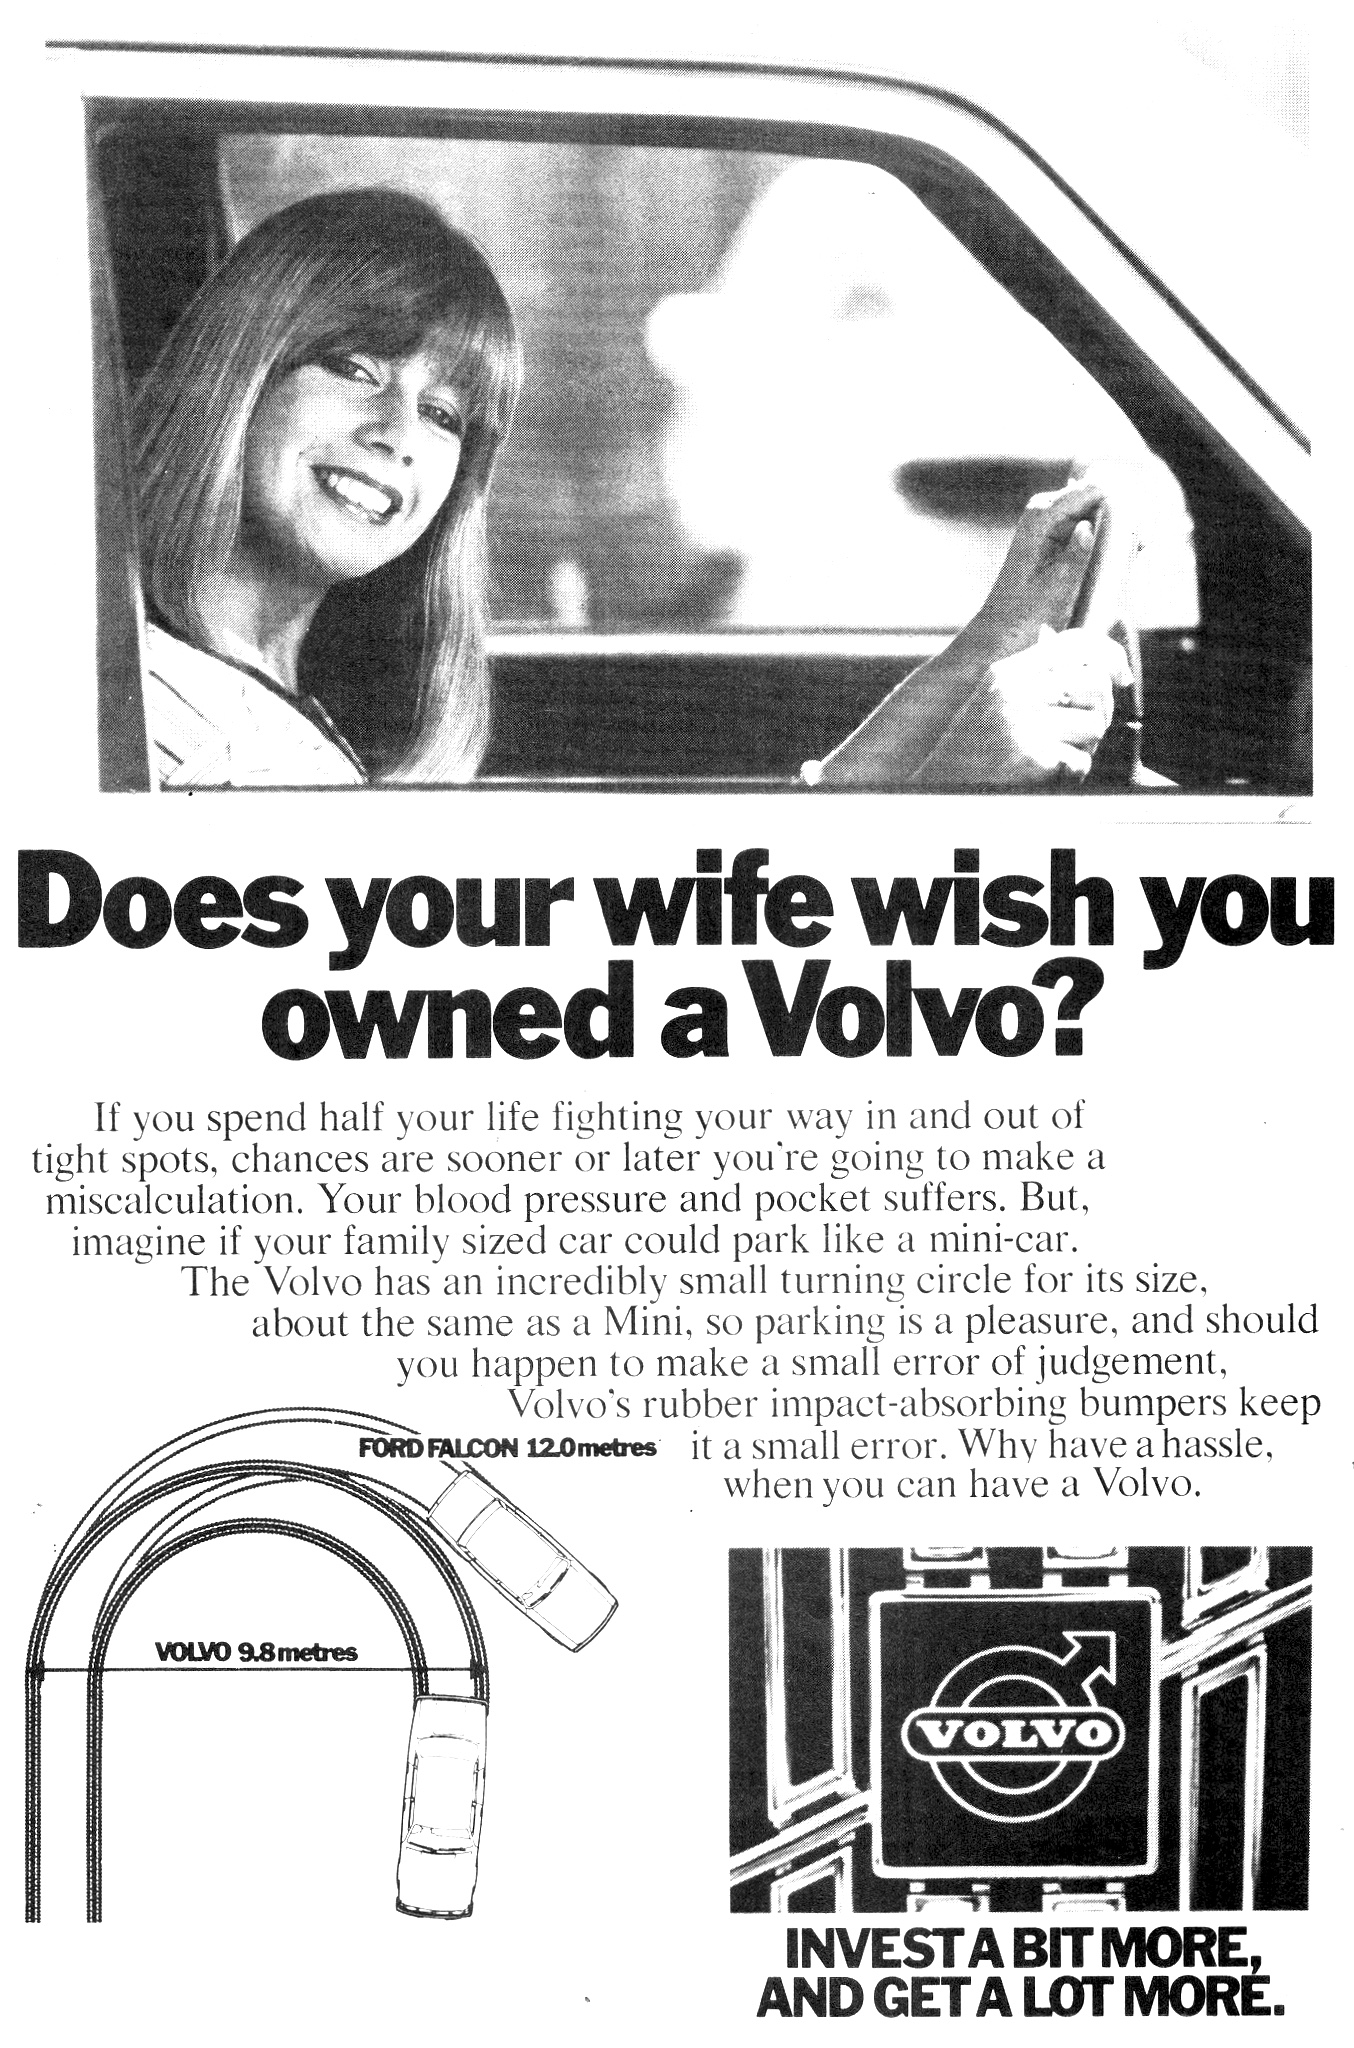 1978 Volvo Does Your Wife Wish You Owned A Volvo